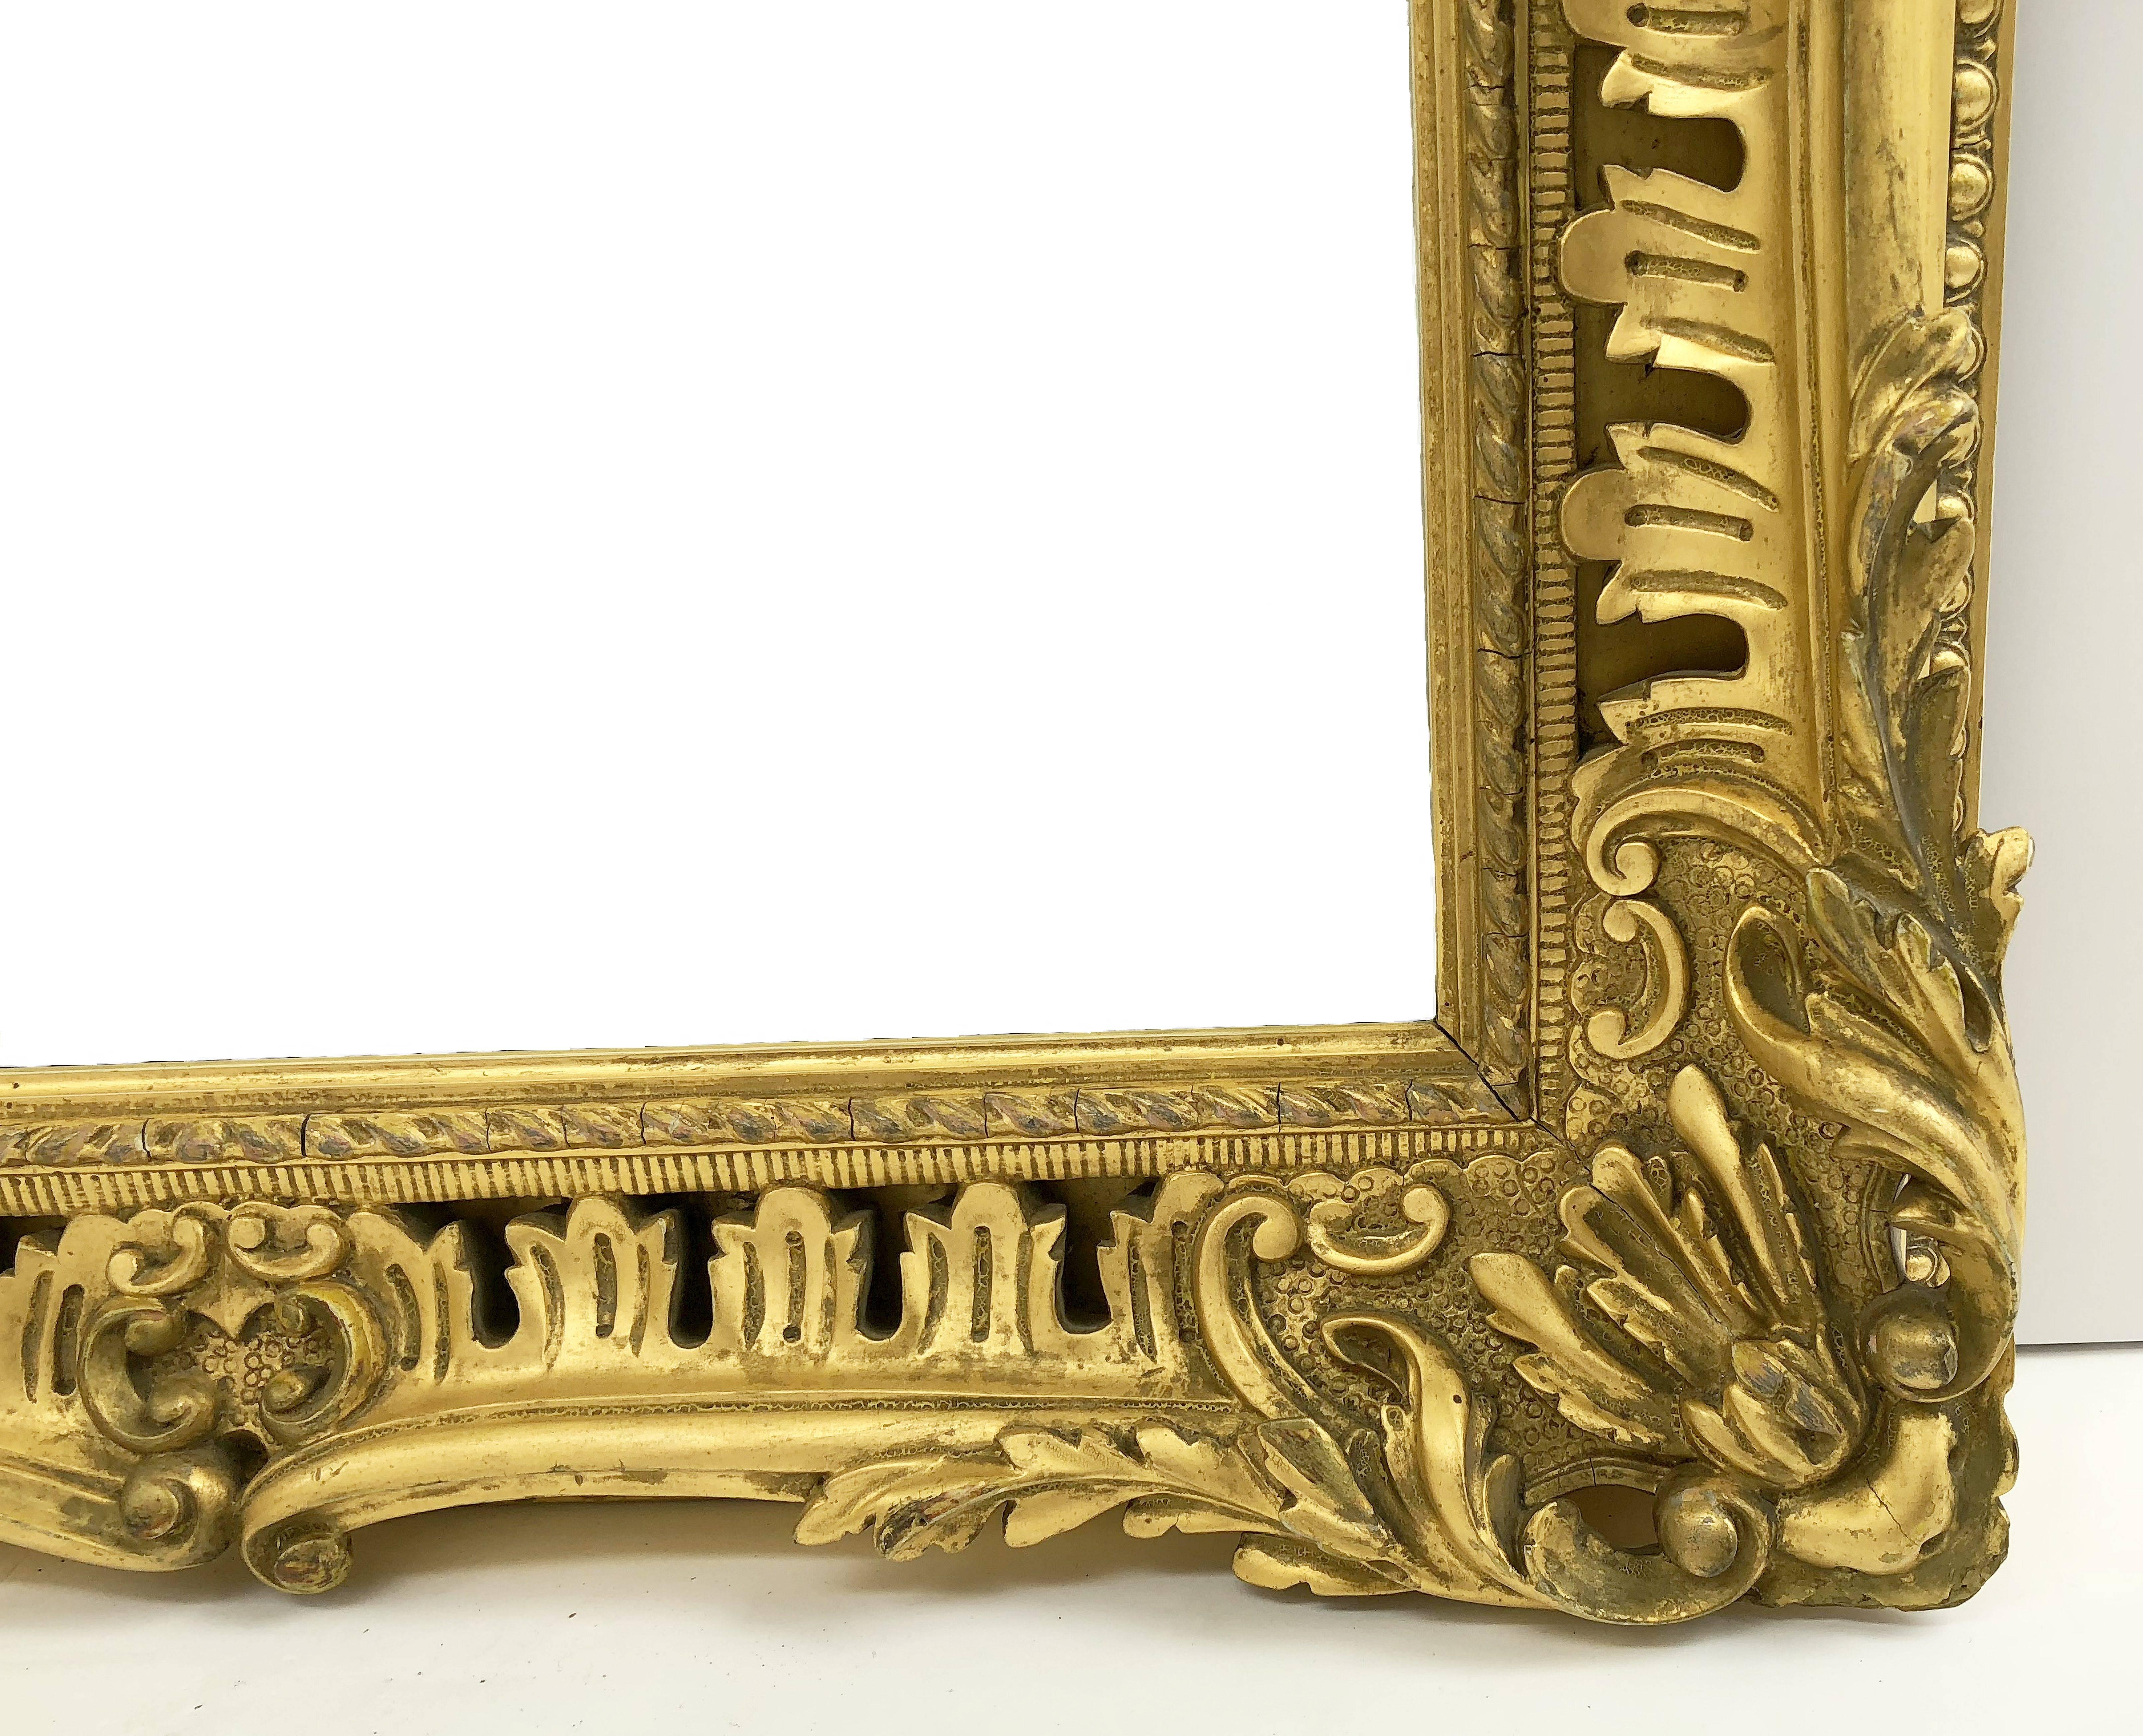 English Rectangular Beveled Mirror in Gilt Frame (H 35 1/4 x W 27) In Good Condition For Sale In Austin, TX